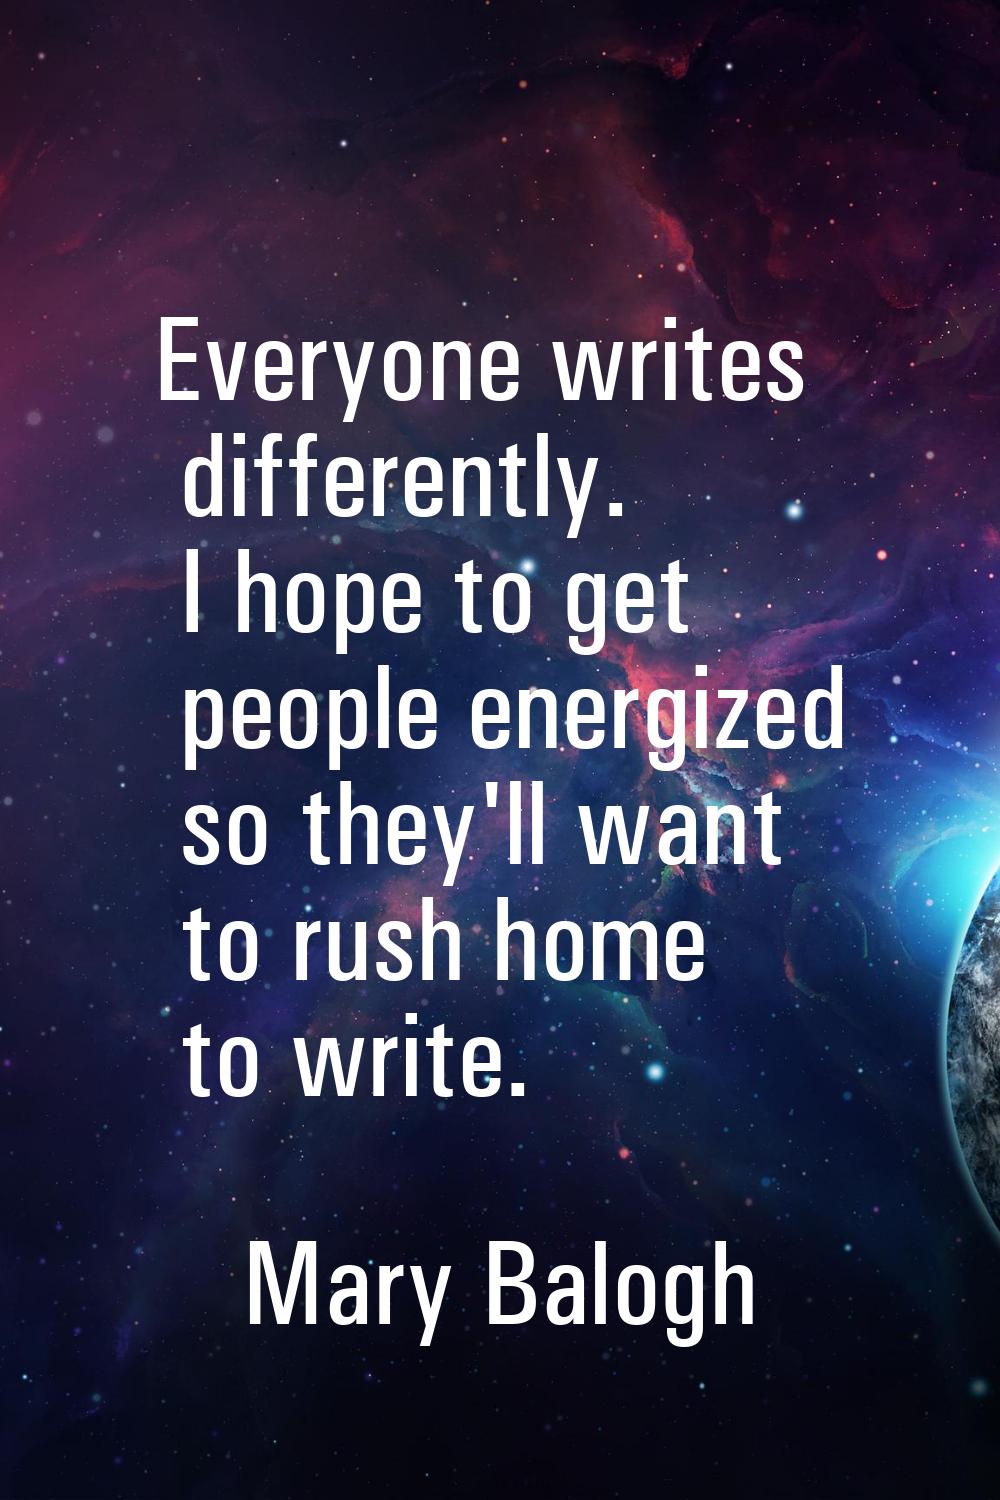 Everyone writes differently. I hope to get people energized so they'll want to rush home to write.